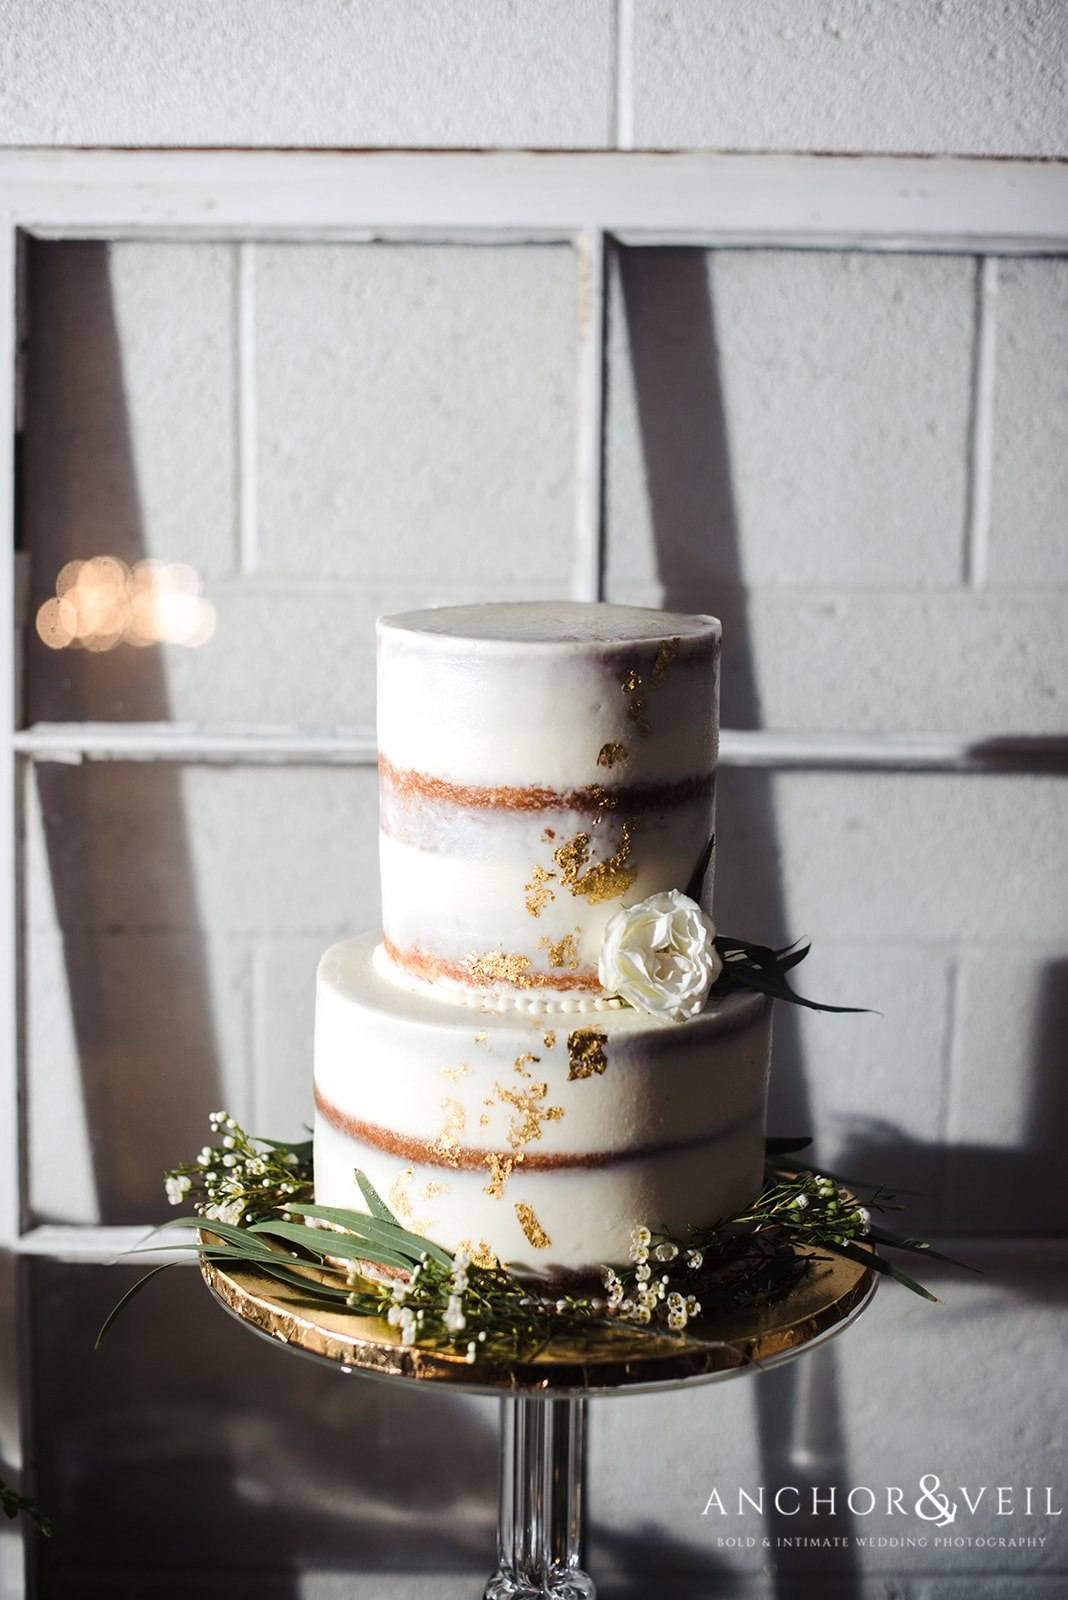 The simple wedding cake at the Circle M Farms Wedding 